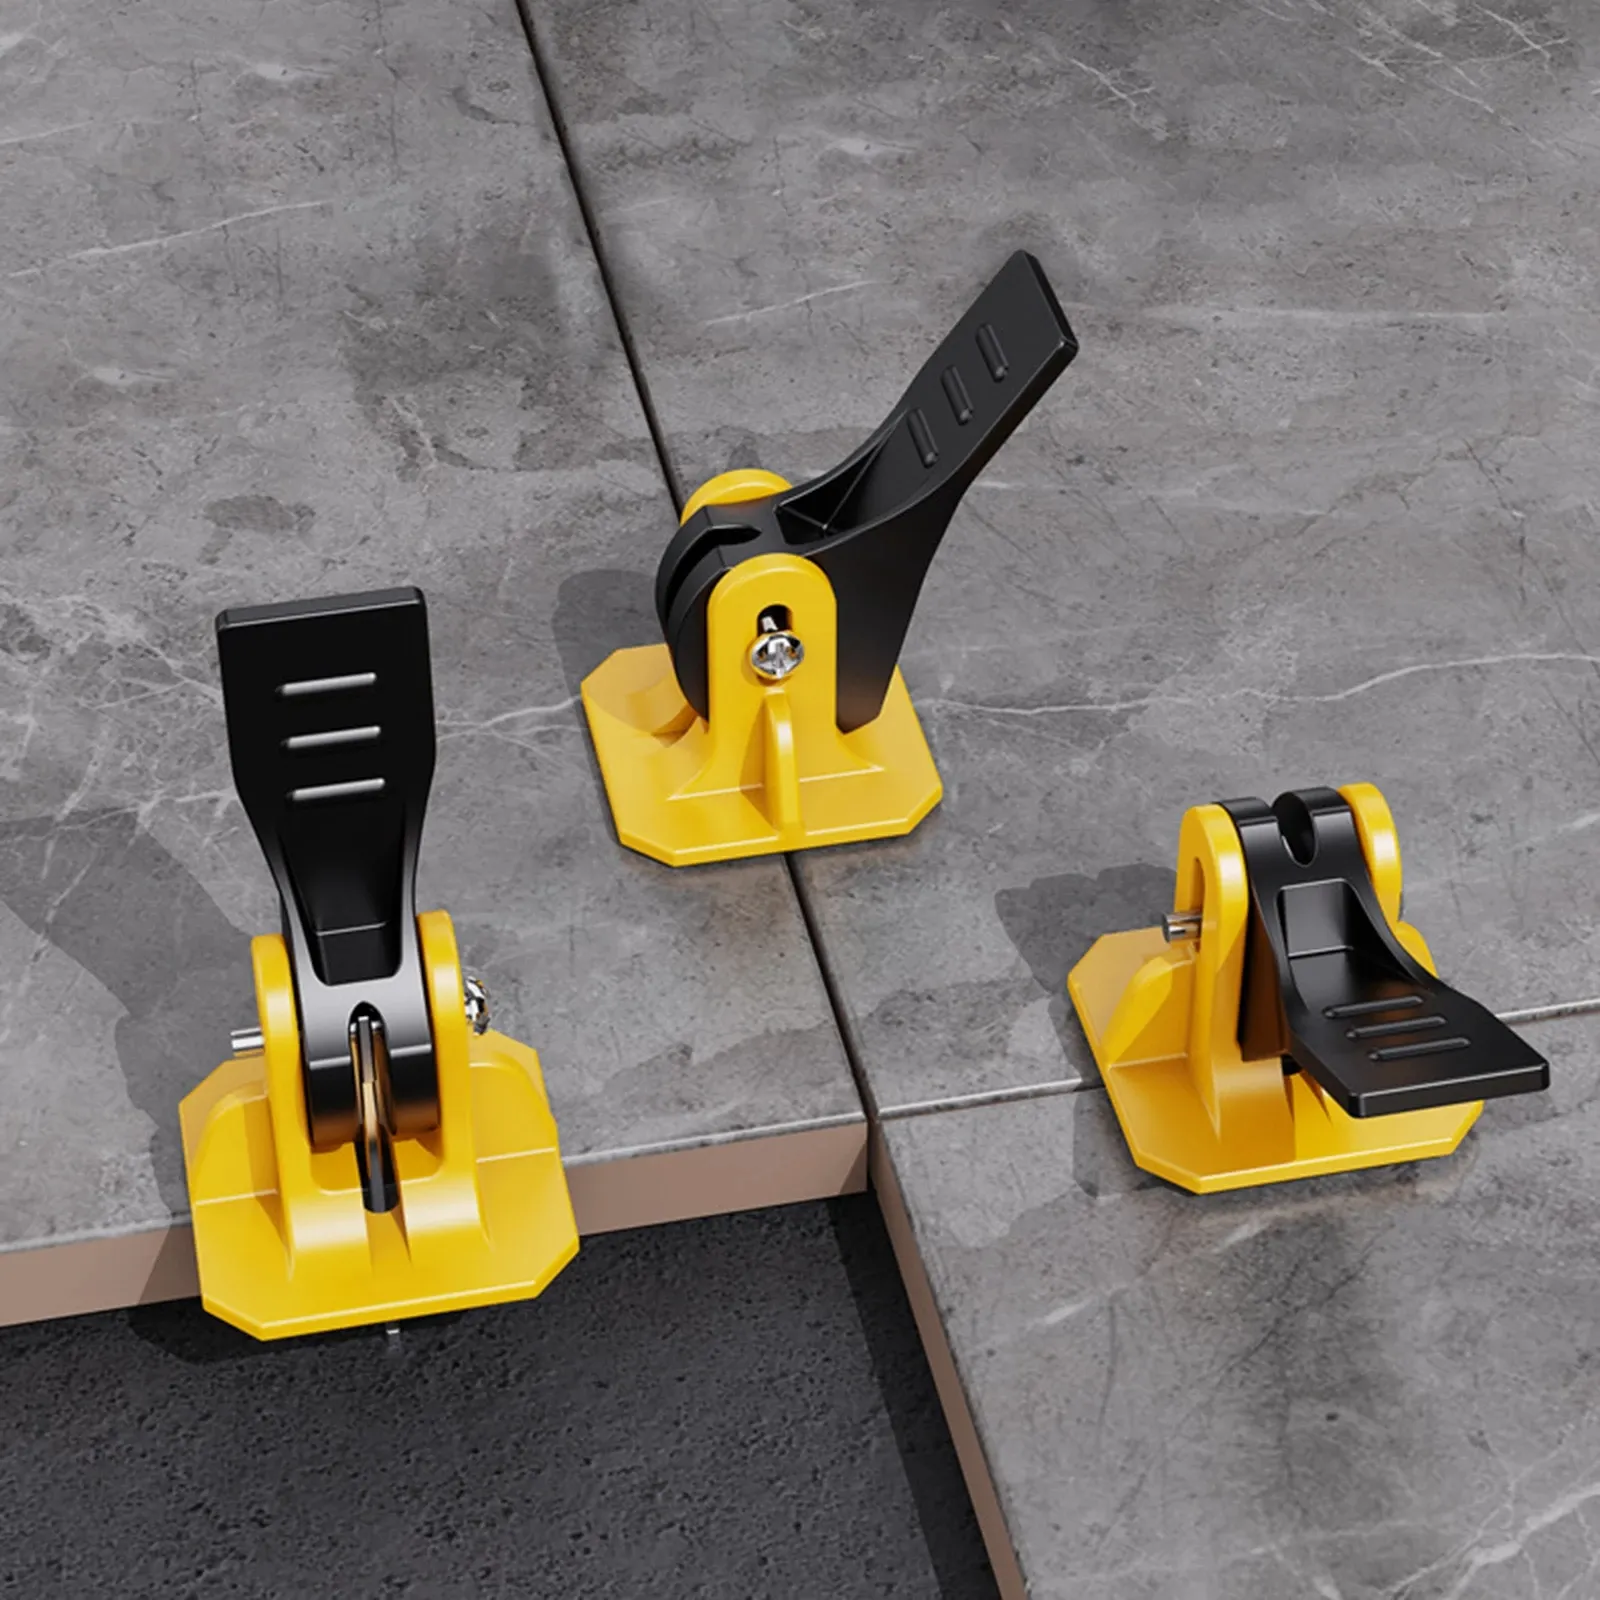 JNZ Porcelain Ceramic Levelers Spacers Set Tile Leveling System Clips Kit for Tile Laying Floor Wall Bricklayer Locator Tools